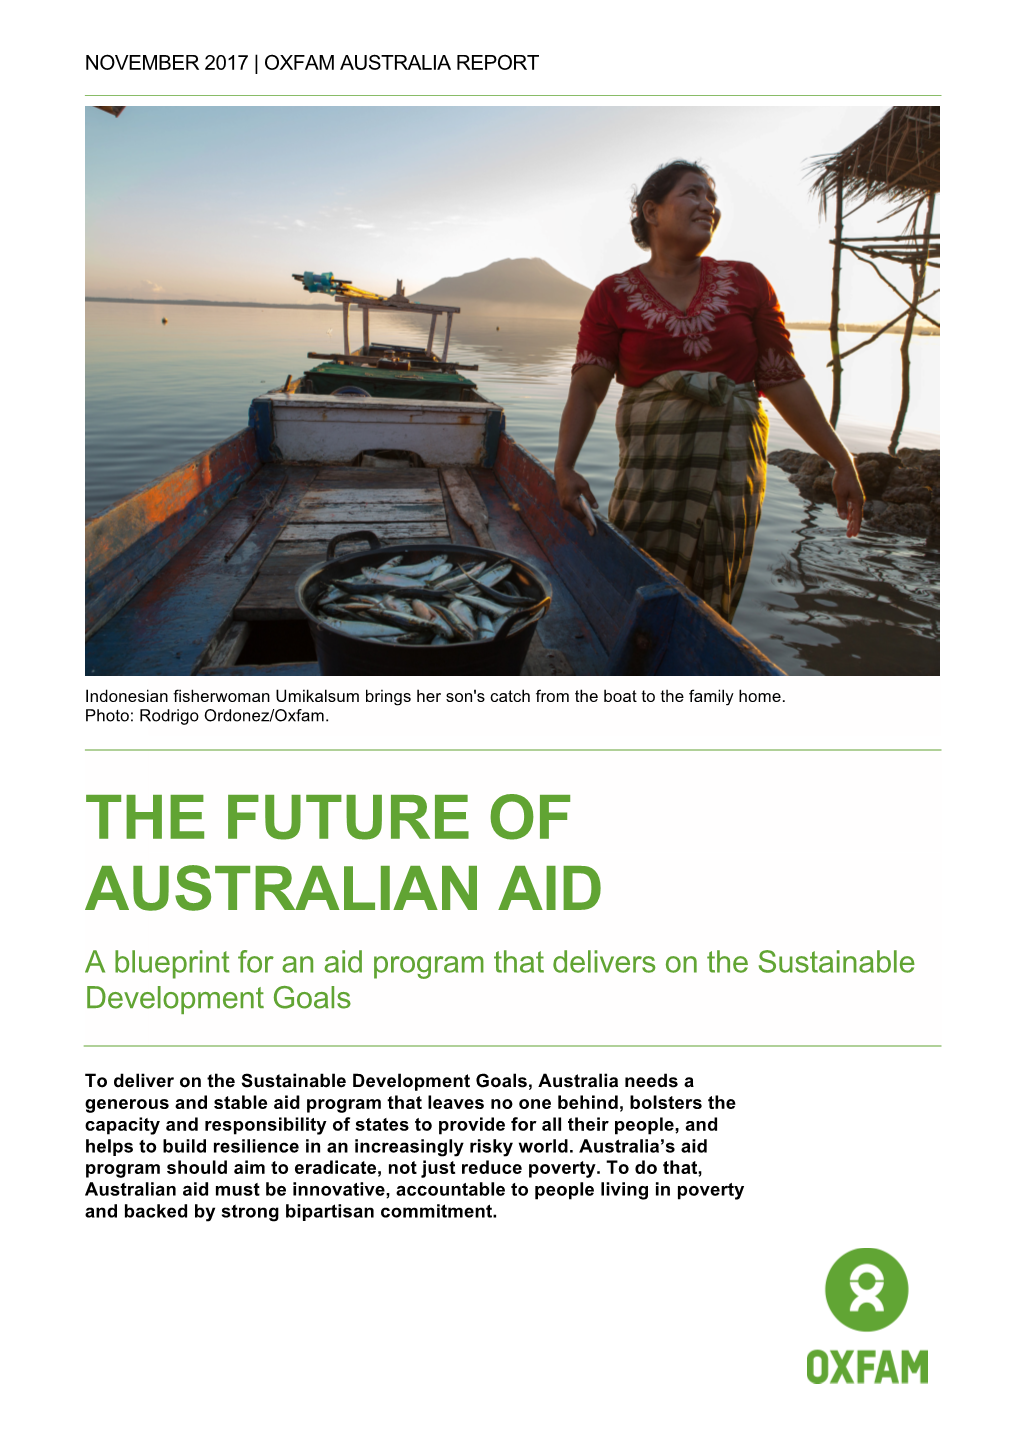 THE FUTURE of AUSTRALIAN AID a Blueprint for an Aid Program That Delivers on the Sustainable Development Goals